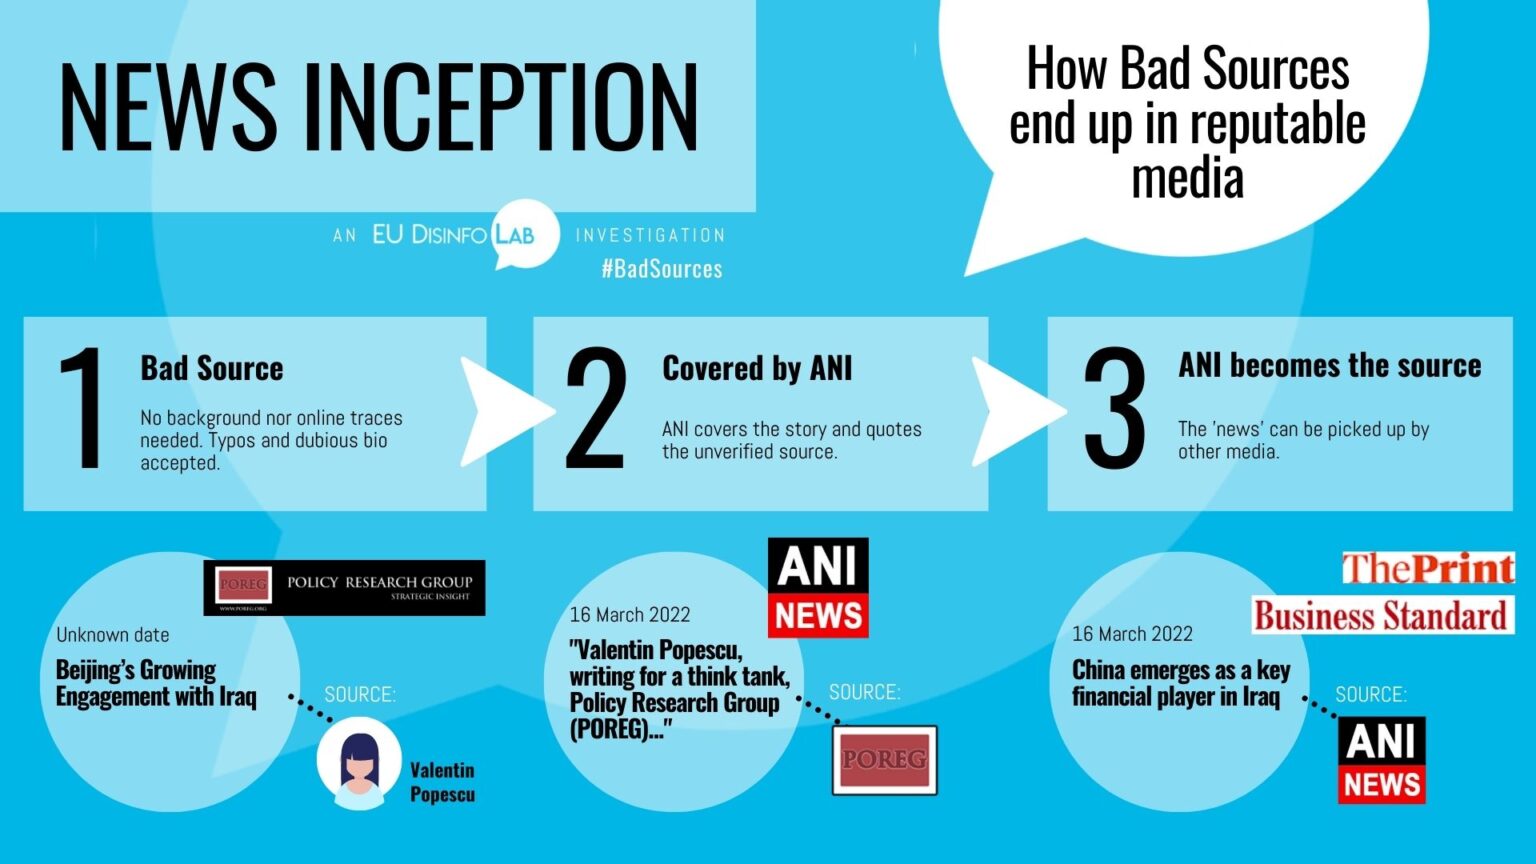 How-bad-sources-end-up-in-reputable-media-3-1536x864.jpg